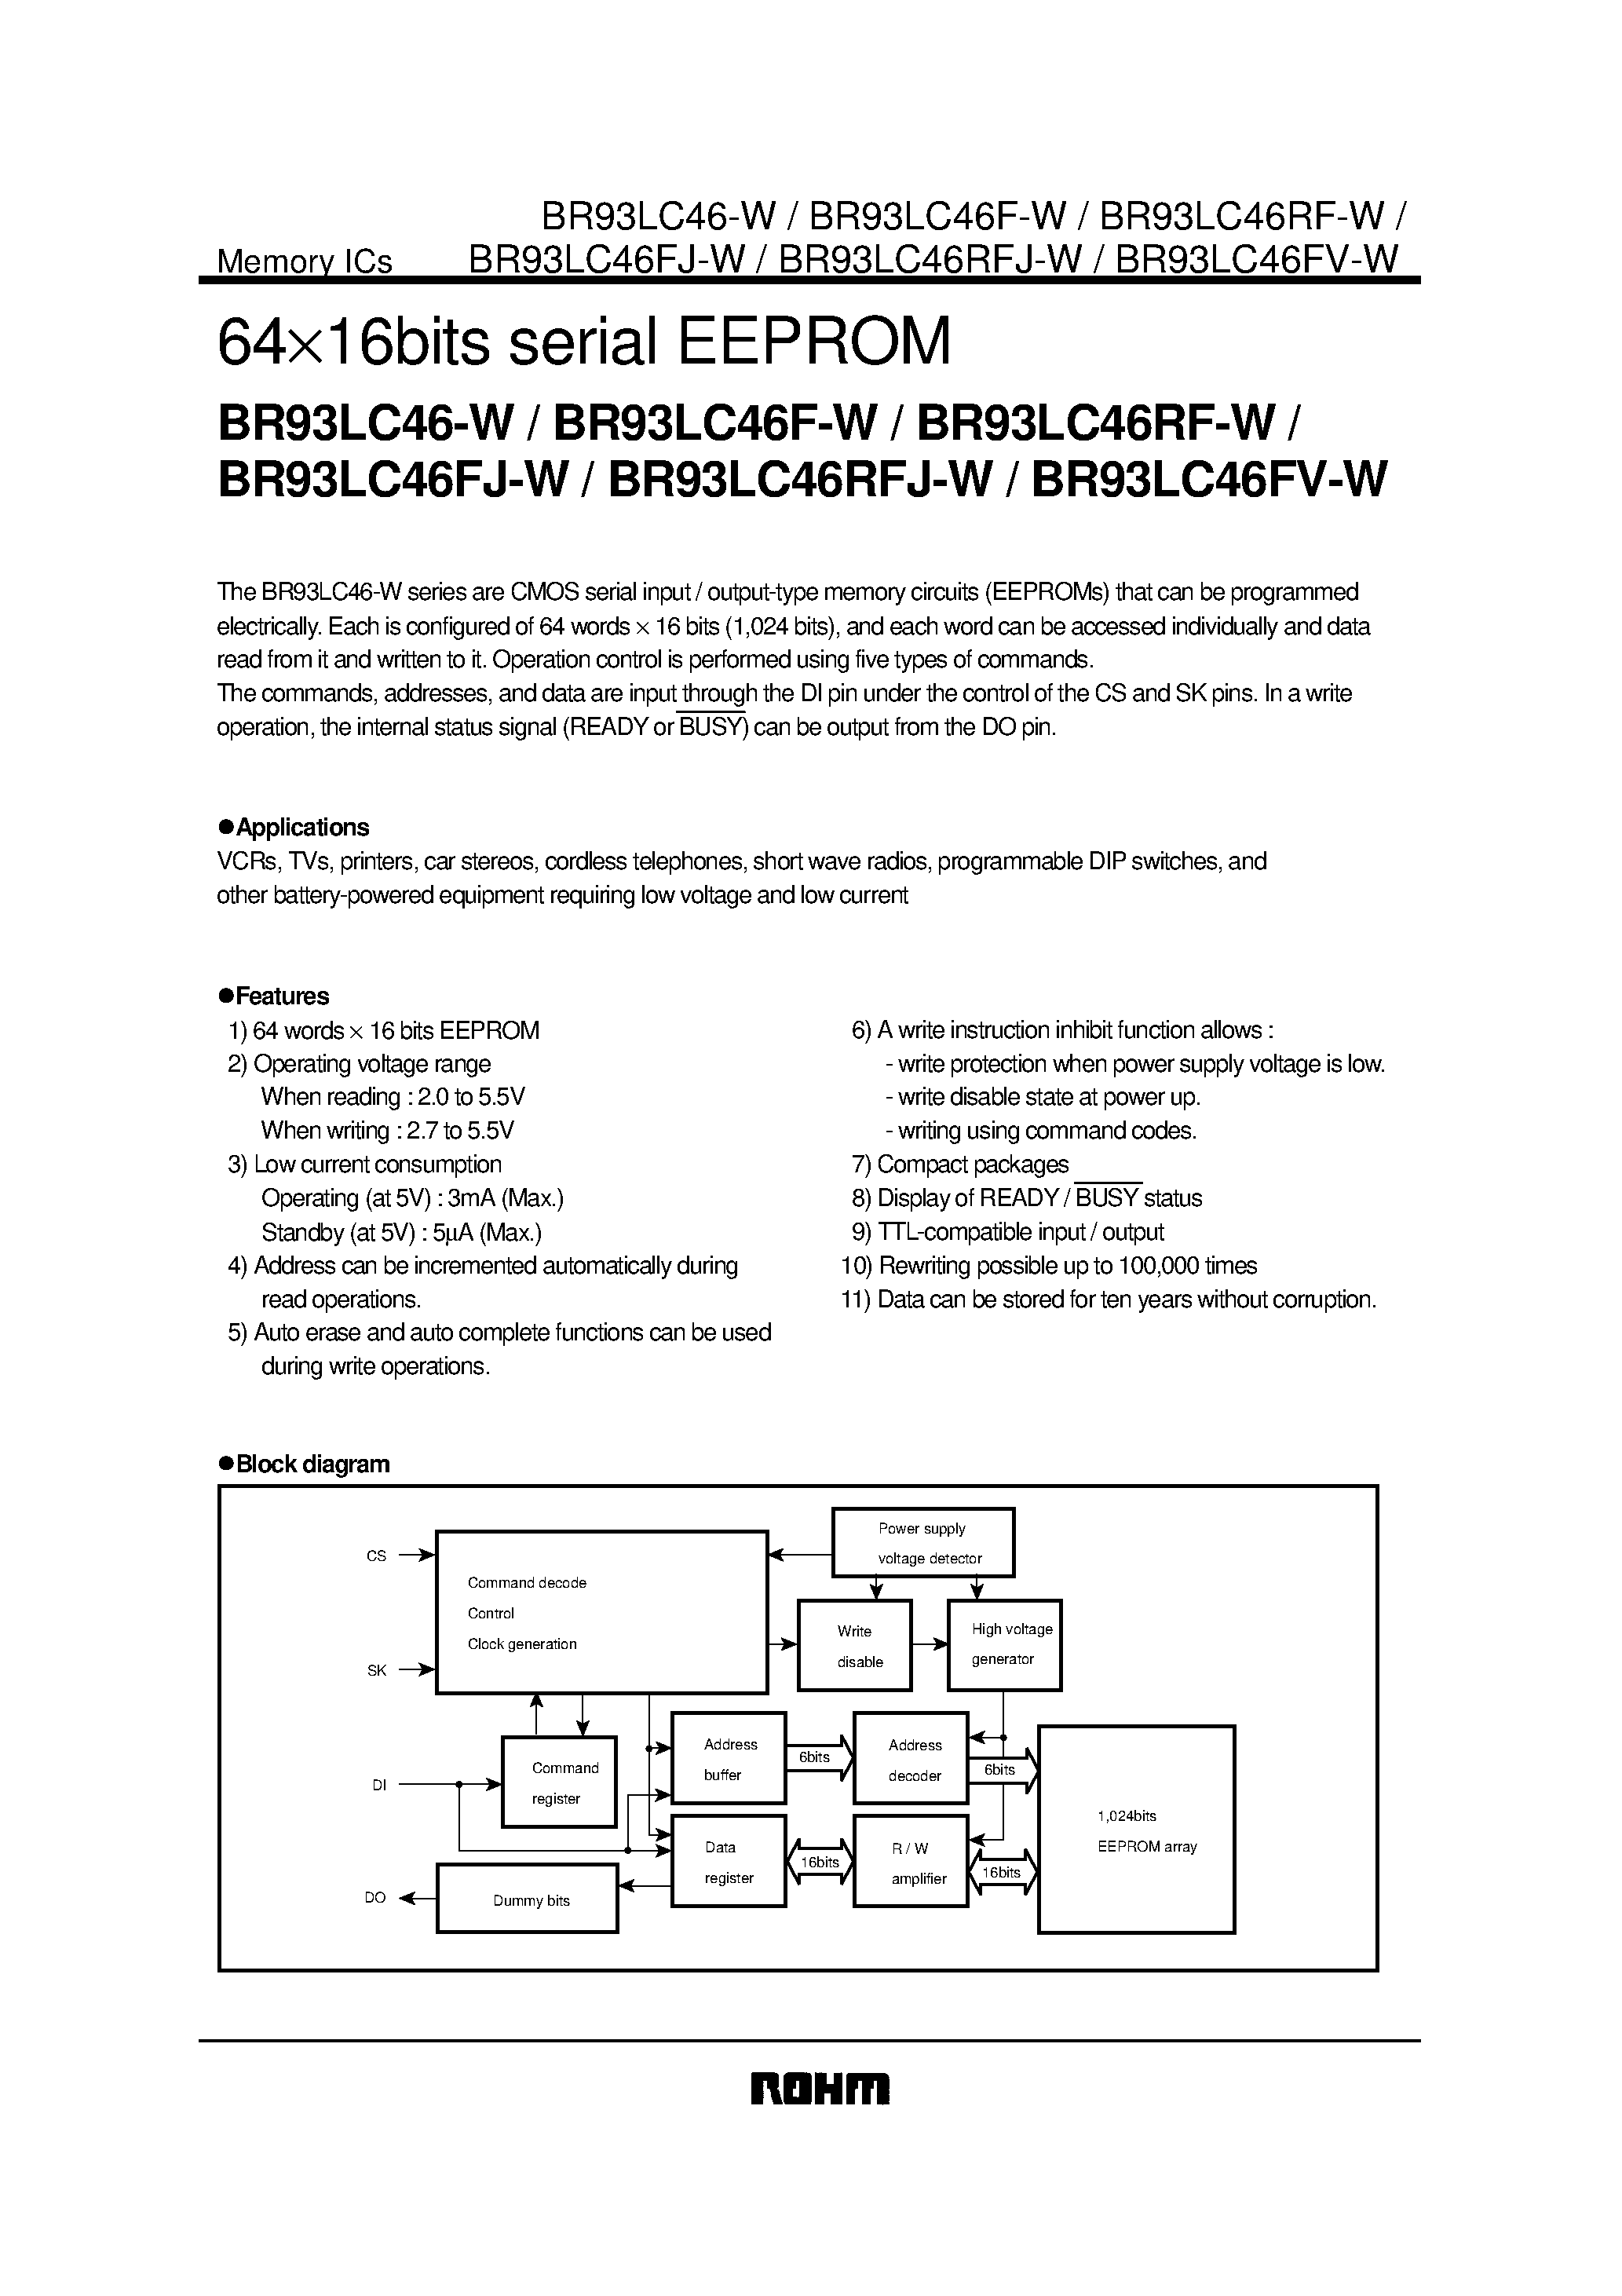 Datasheet BR93LC46FV-W - 6416bits serial EEPROM page 1